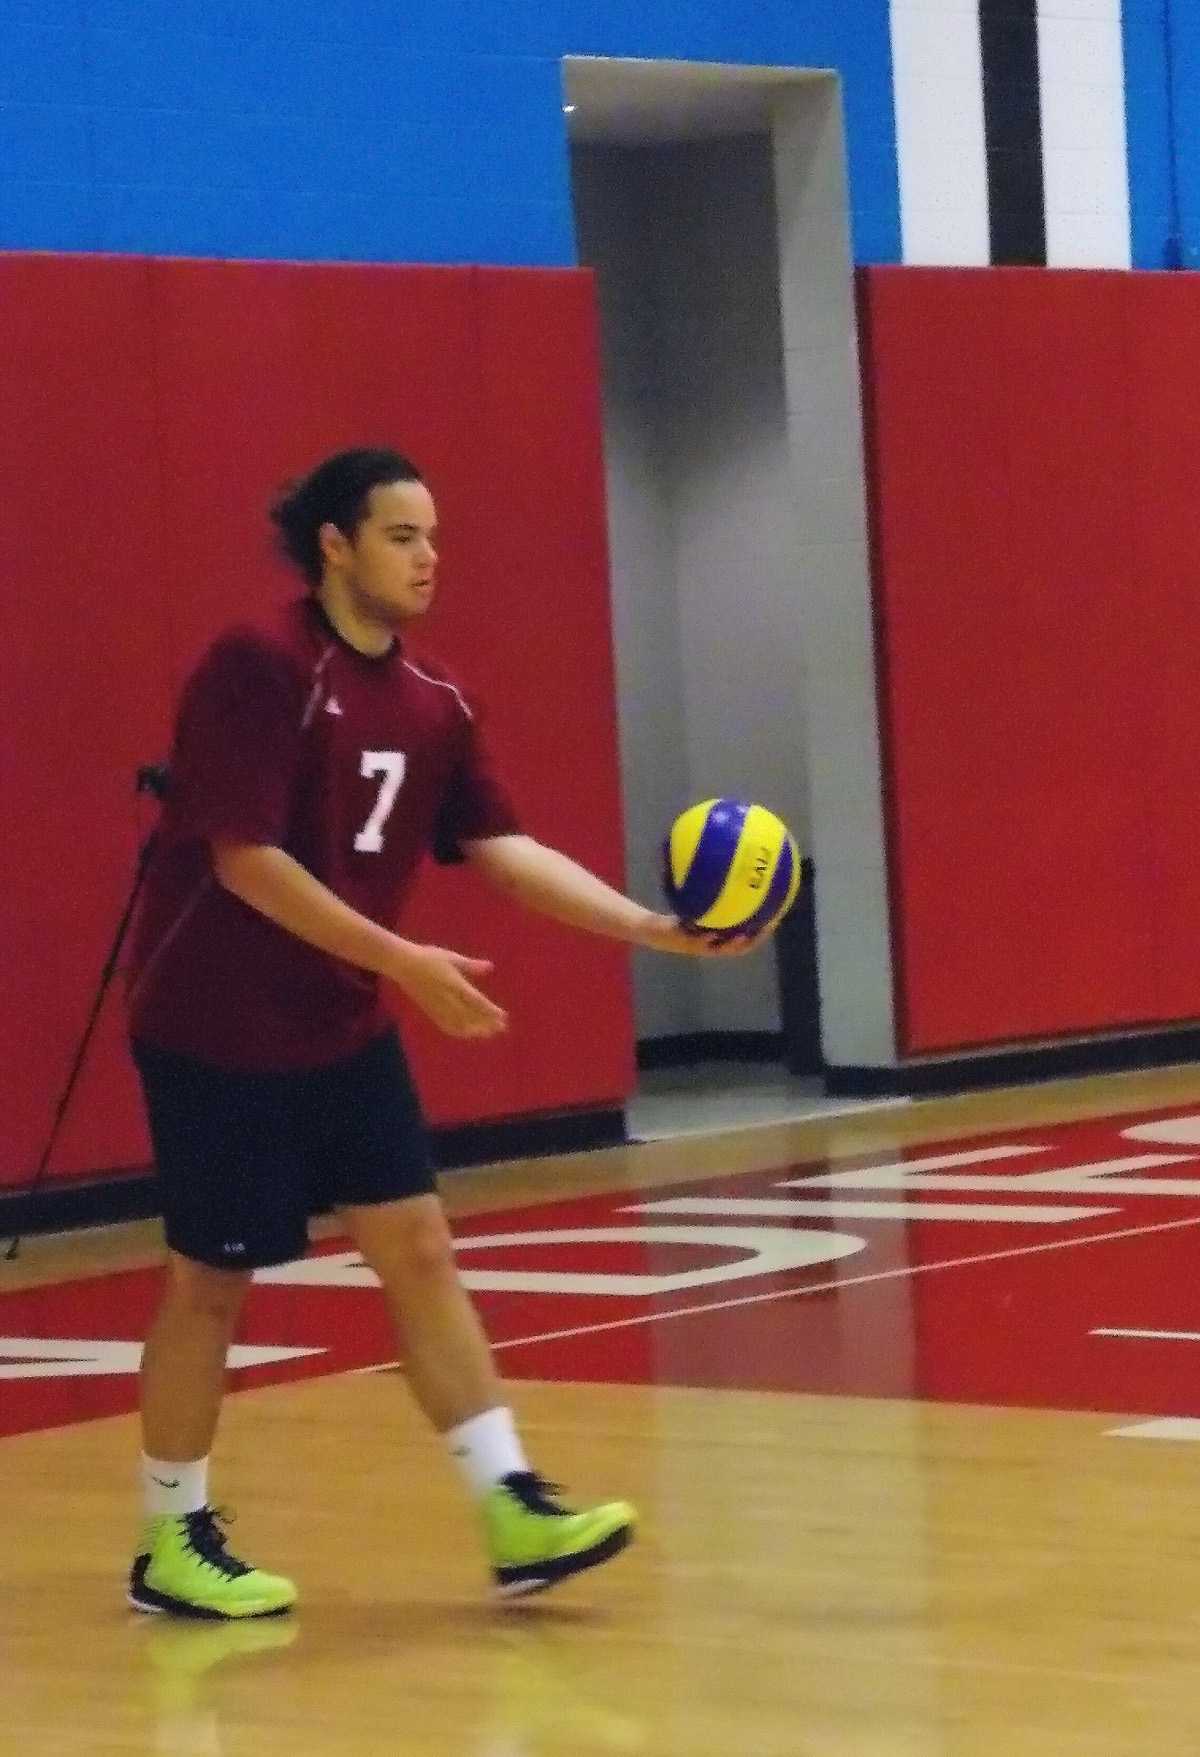 Knights volleyball player Rafael Garcia prepares to serve the ball during their home game against Mesa College on March 1, resulting in a loss of 0-3.